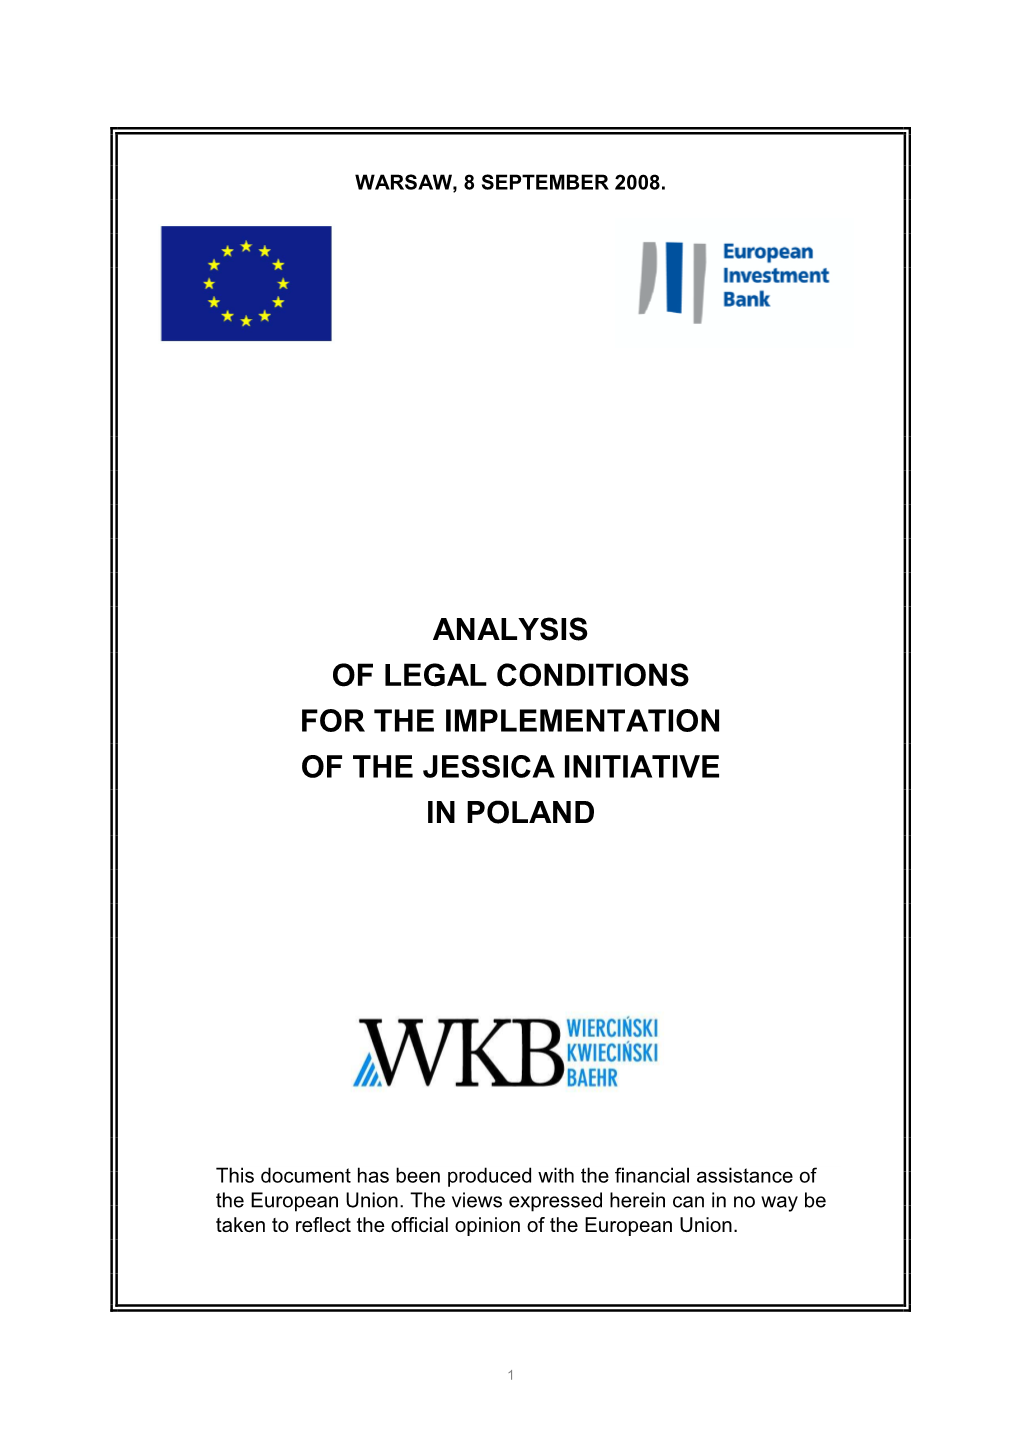 Analysis of Legal Conditions for the Implementation of the Jessica Initiative in Poland